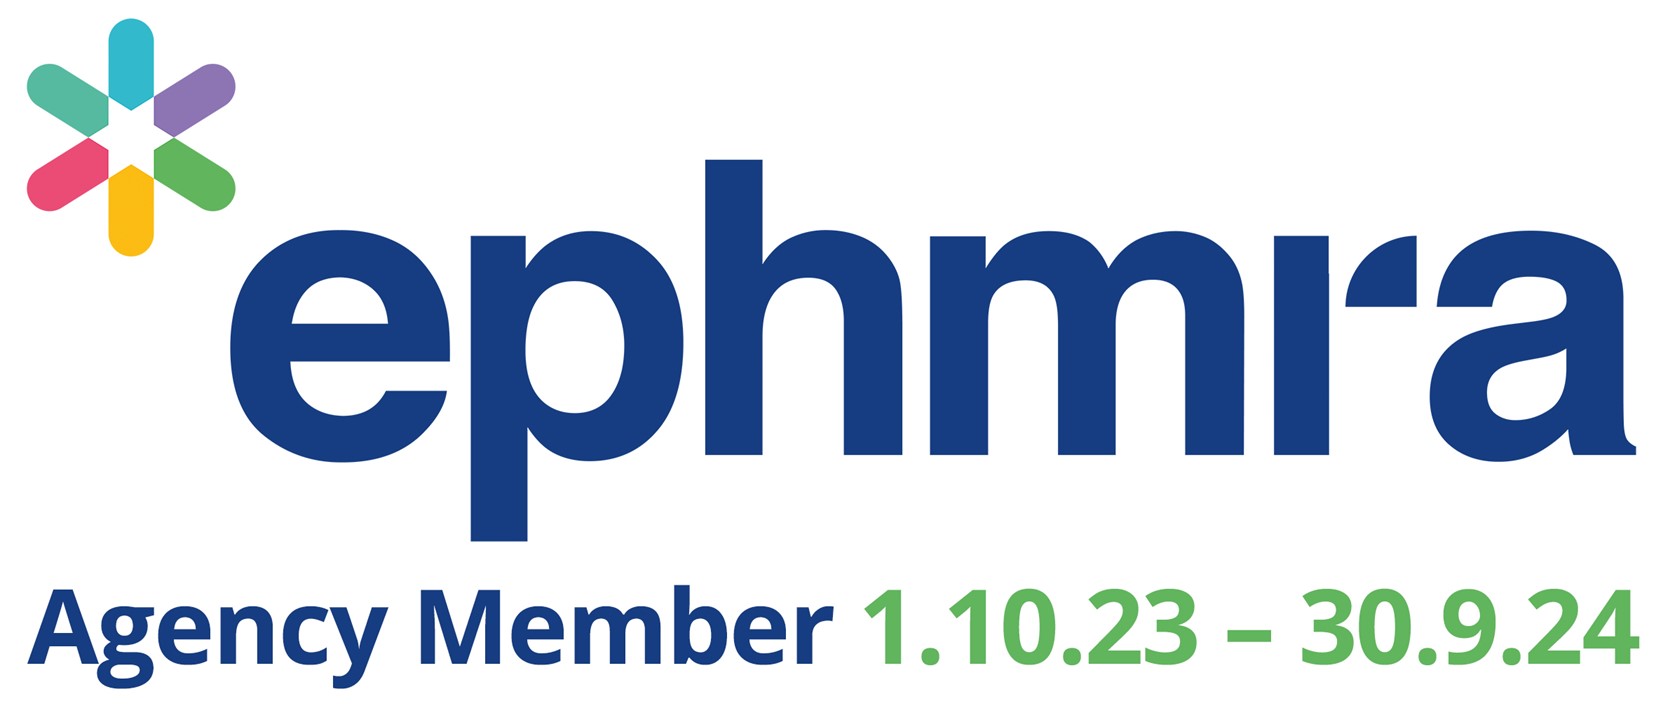 HOK Research GmbH and why we became members of the Ephmra standards community